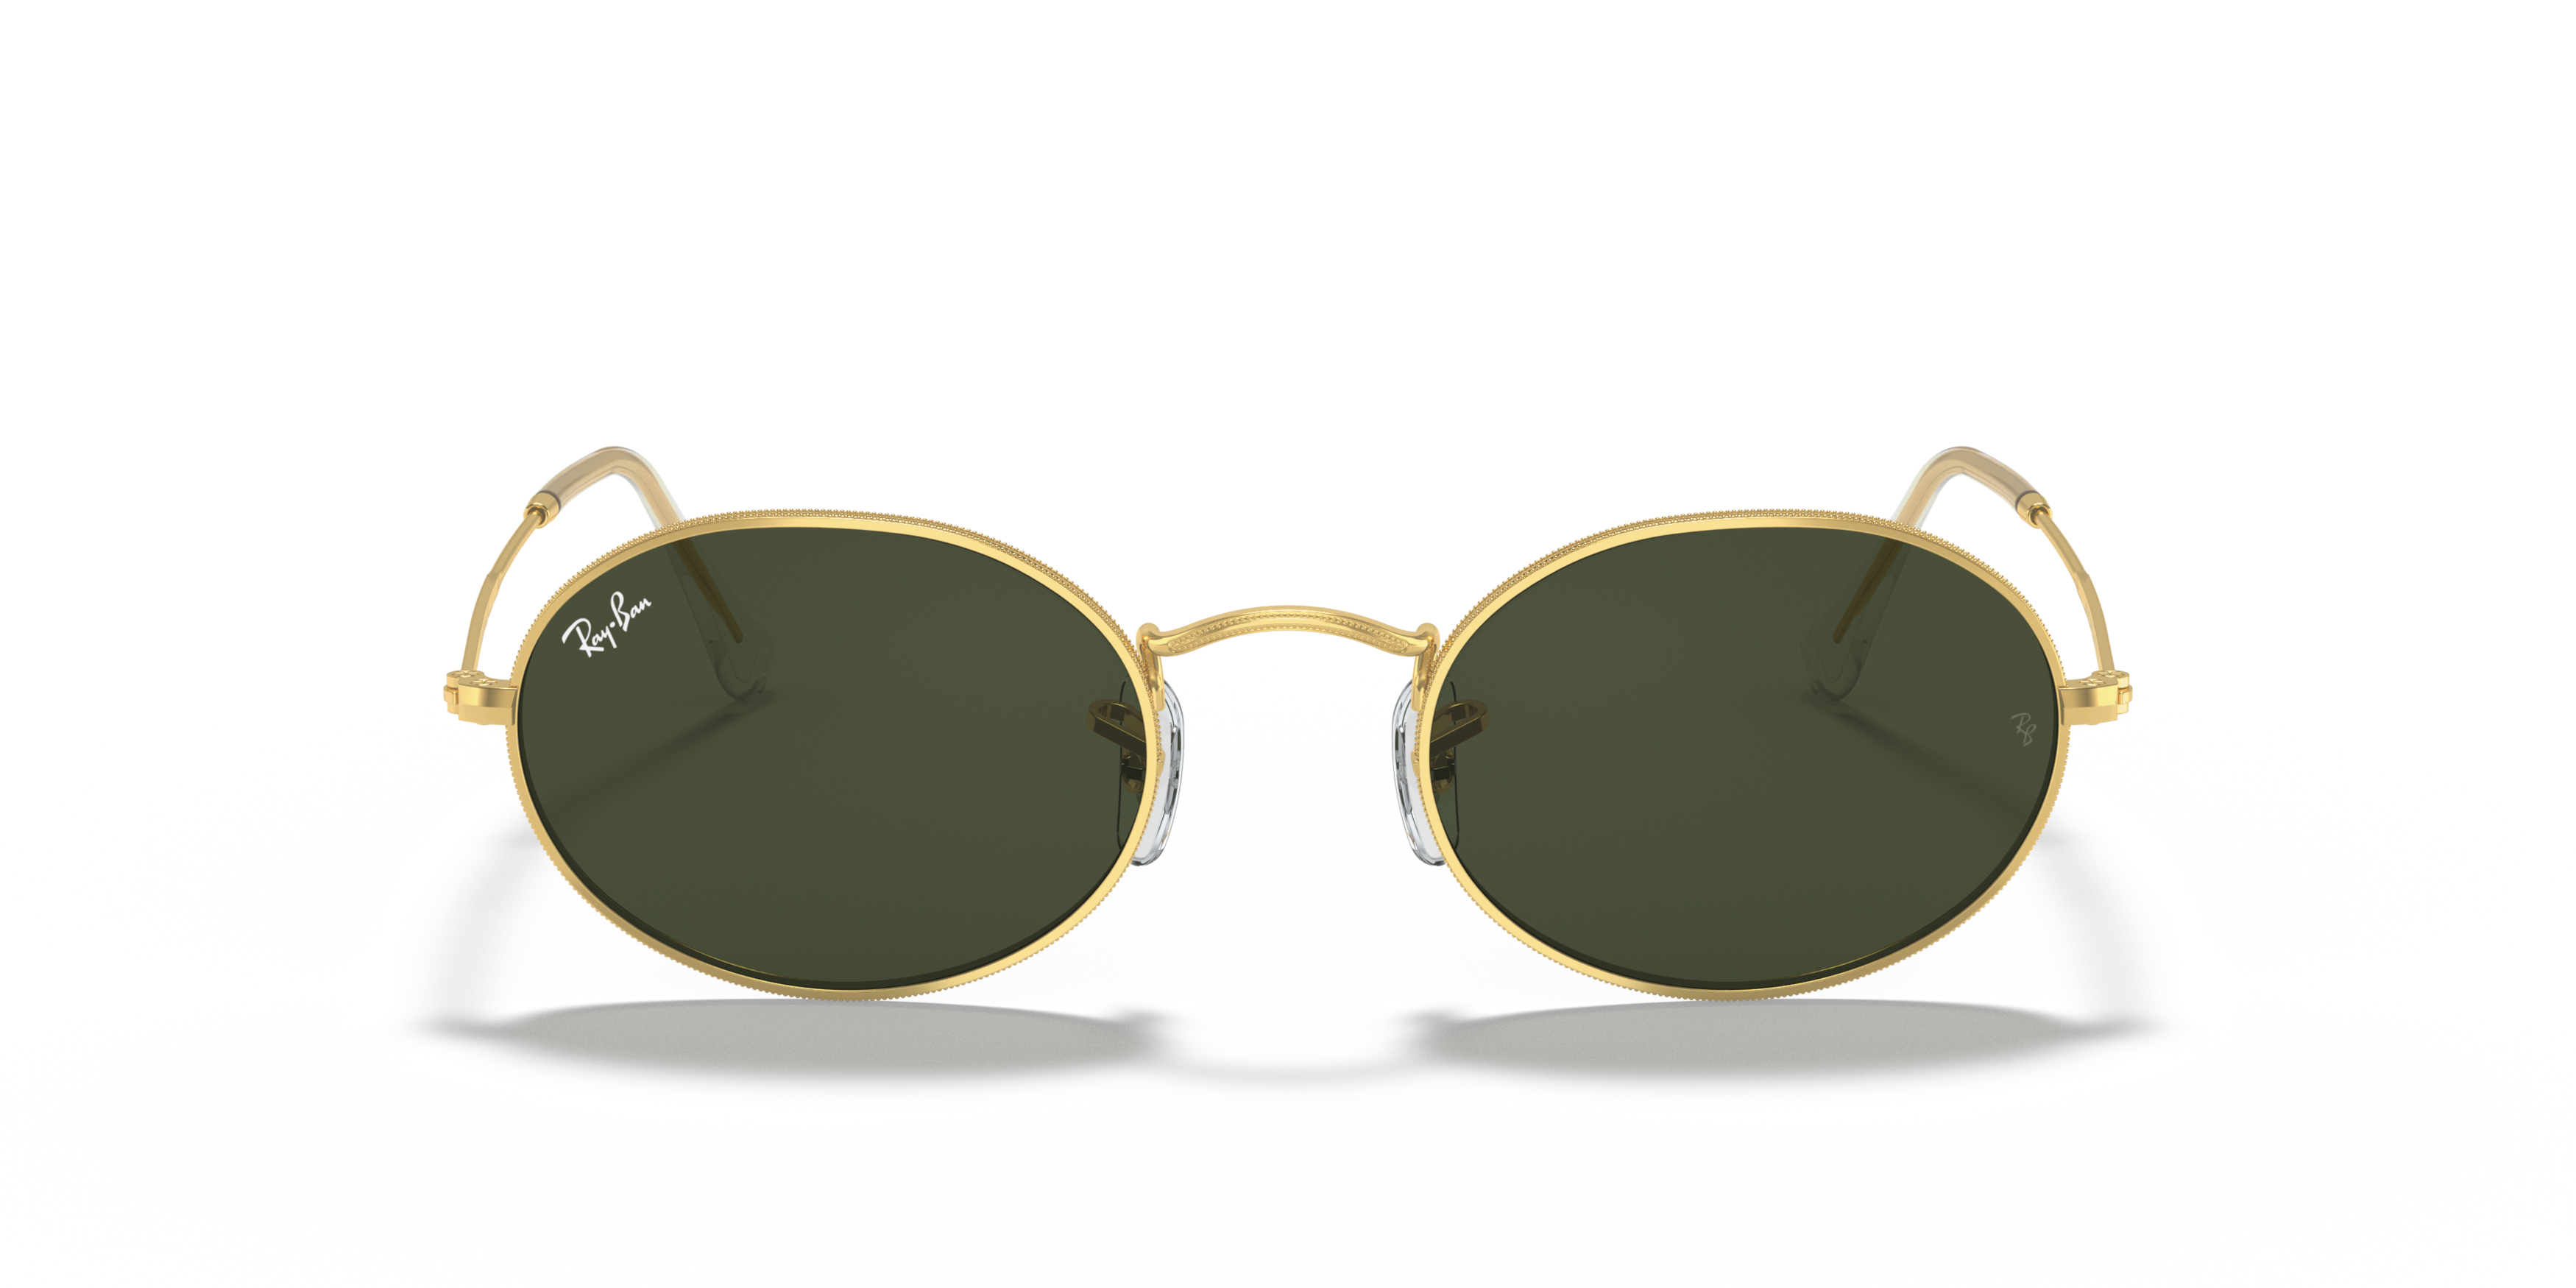 [products.image.front] Ray-Ban Oval Legend Gold RB3547 919631